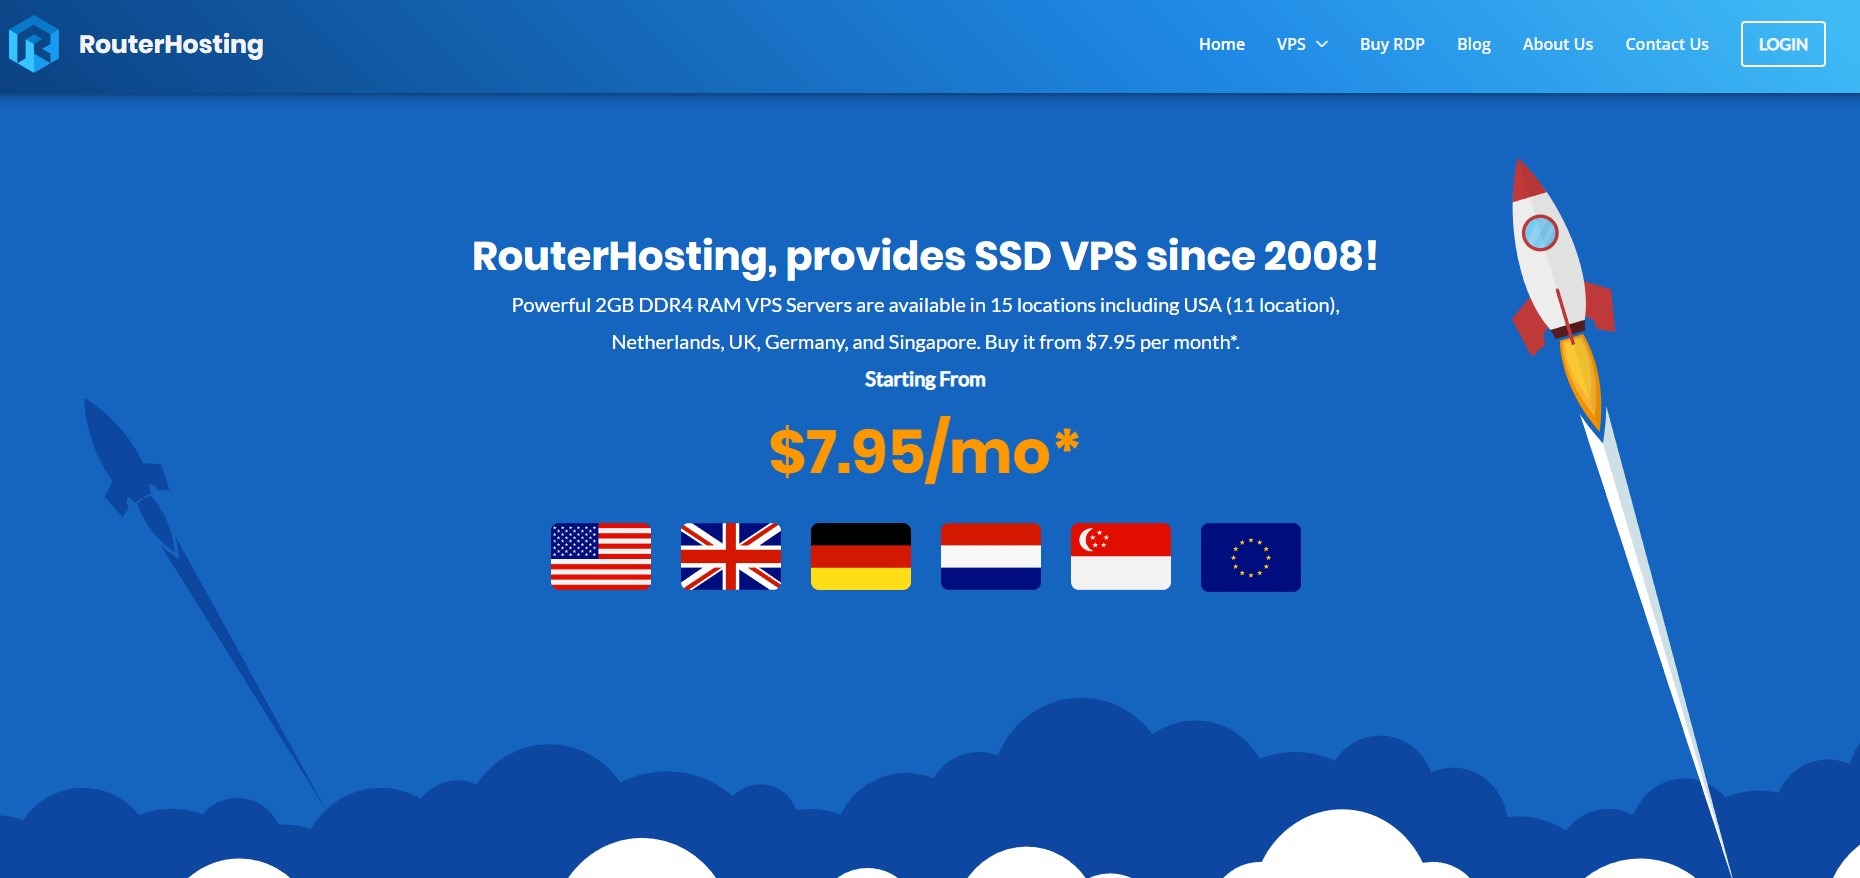 Leading Hosting Service Provider Brings Affordable Windows VPS to Customers